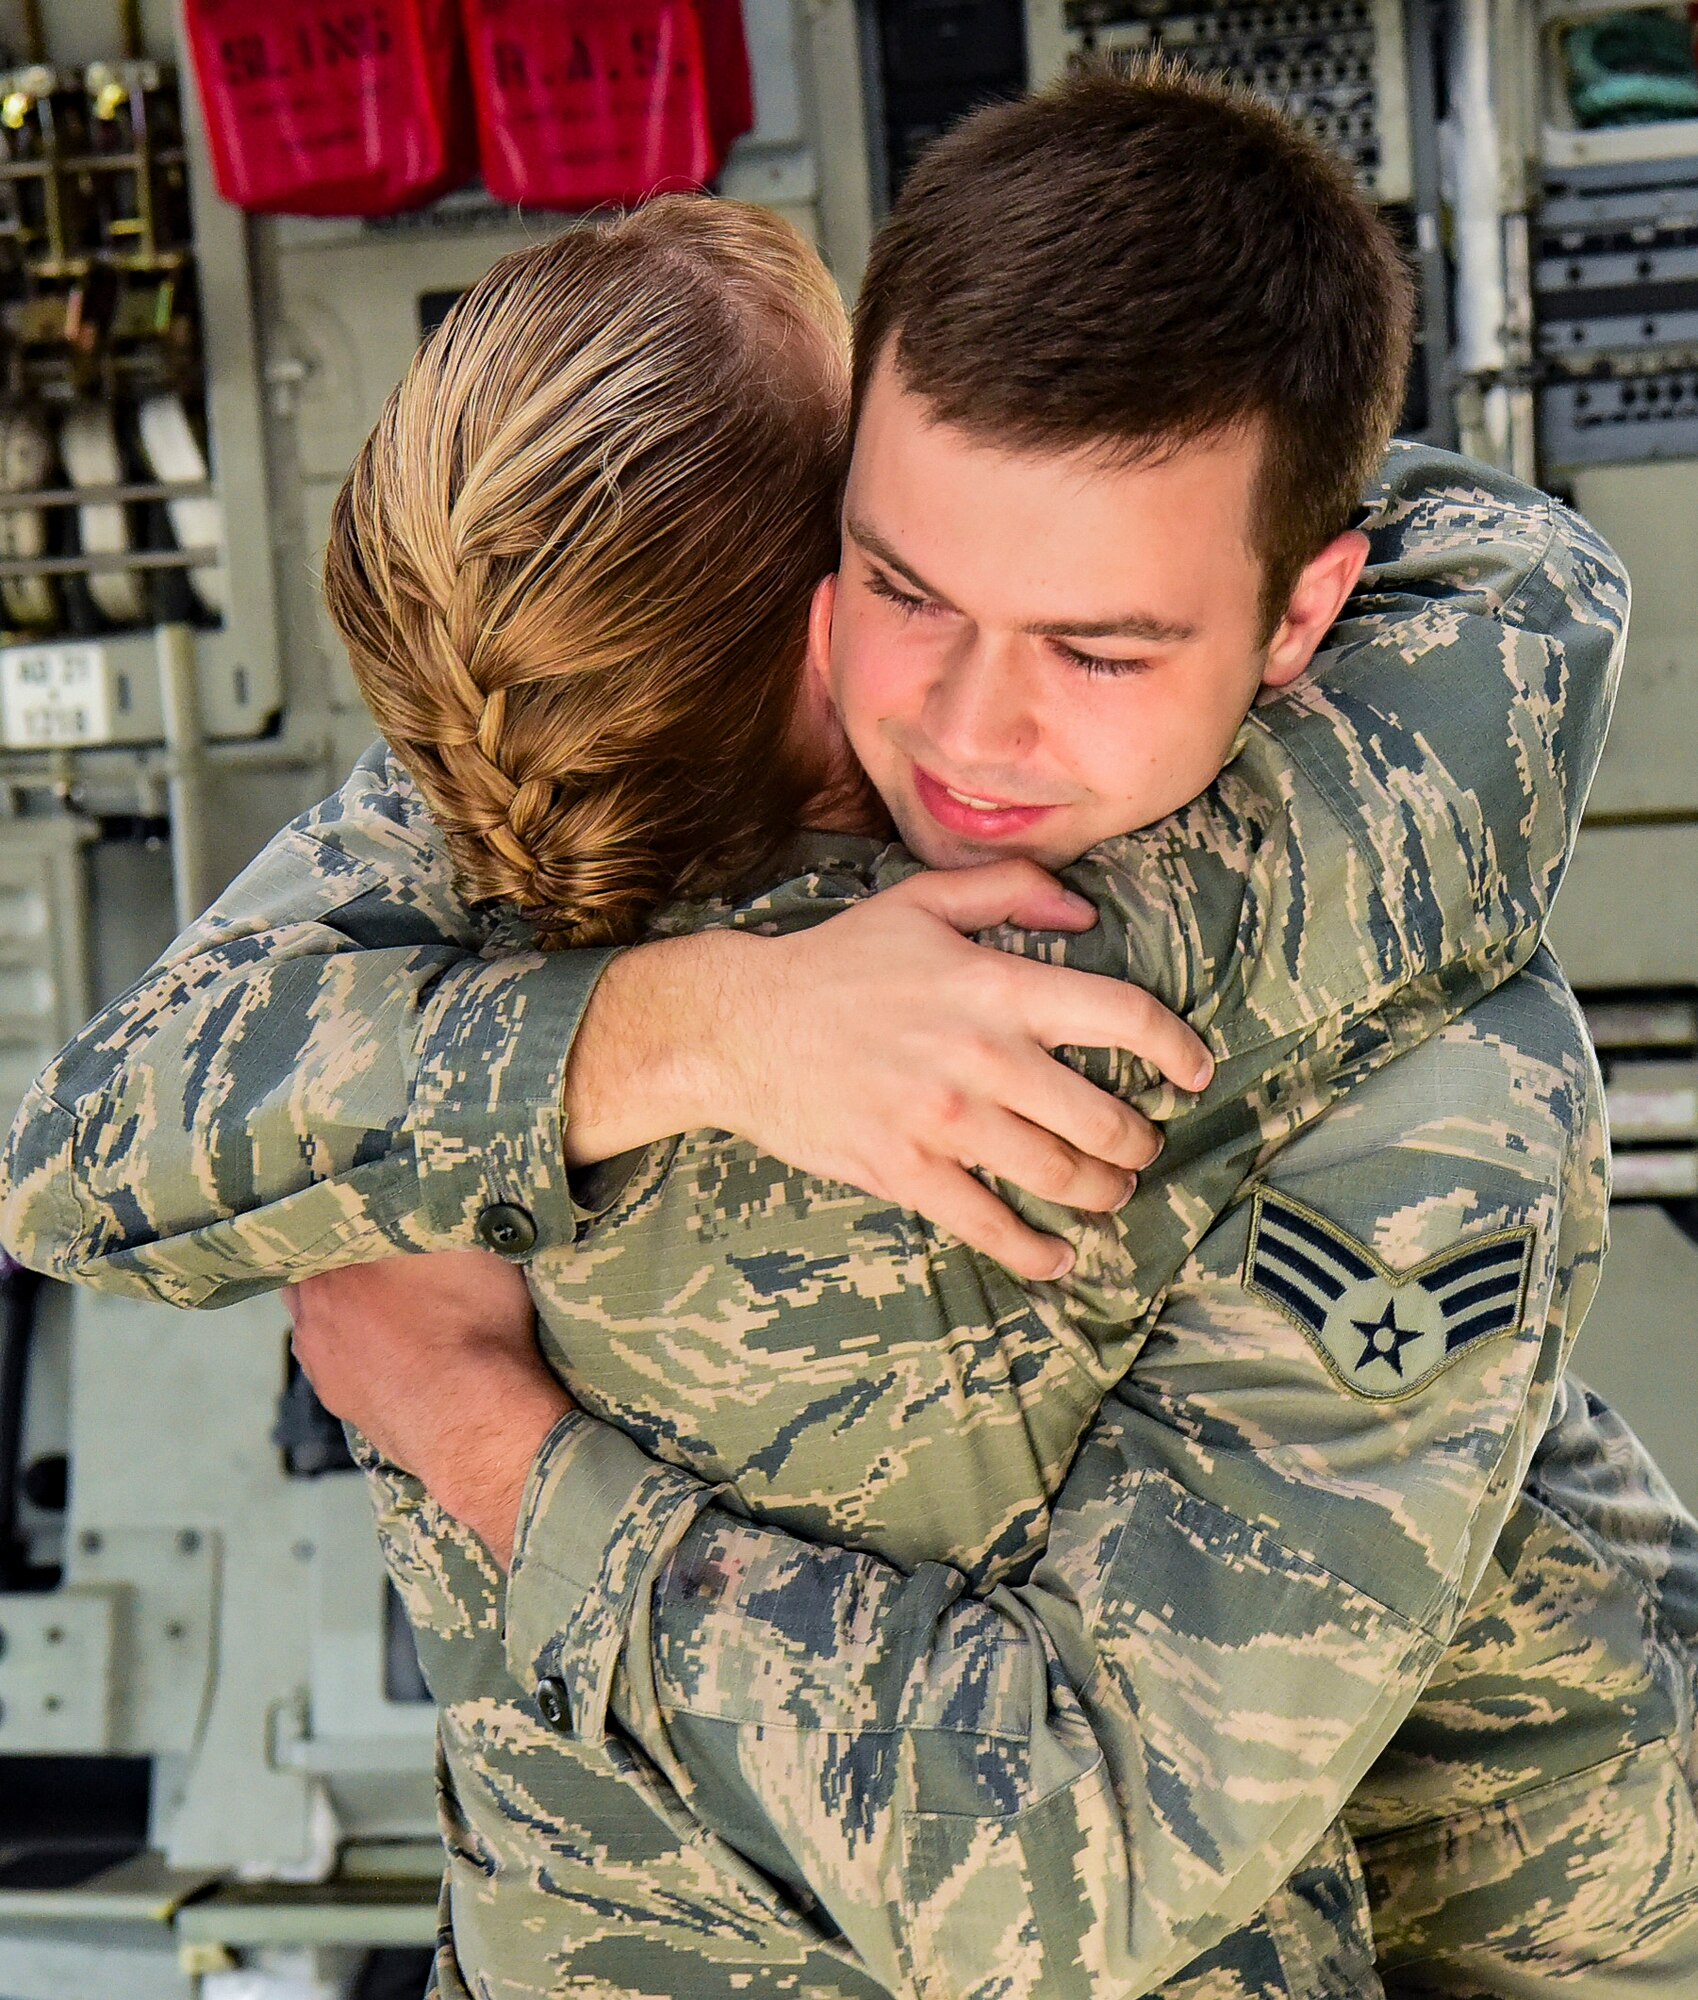 Senior Airman Cody Rupp, 628th Communications Squadron cyber-systems administrator, hugs his mom, Lt. Col. Karen Rupp, 437th Aerial Port Squadron commander, after she performed his re-enlistment ceremony Aug. 21, 2018, at Joint Base Charleston, S.C. The occasion also doubled as a surprise when his mother gave him the good news he had achieved the rank of staff sergeant.